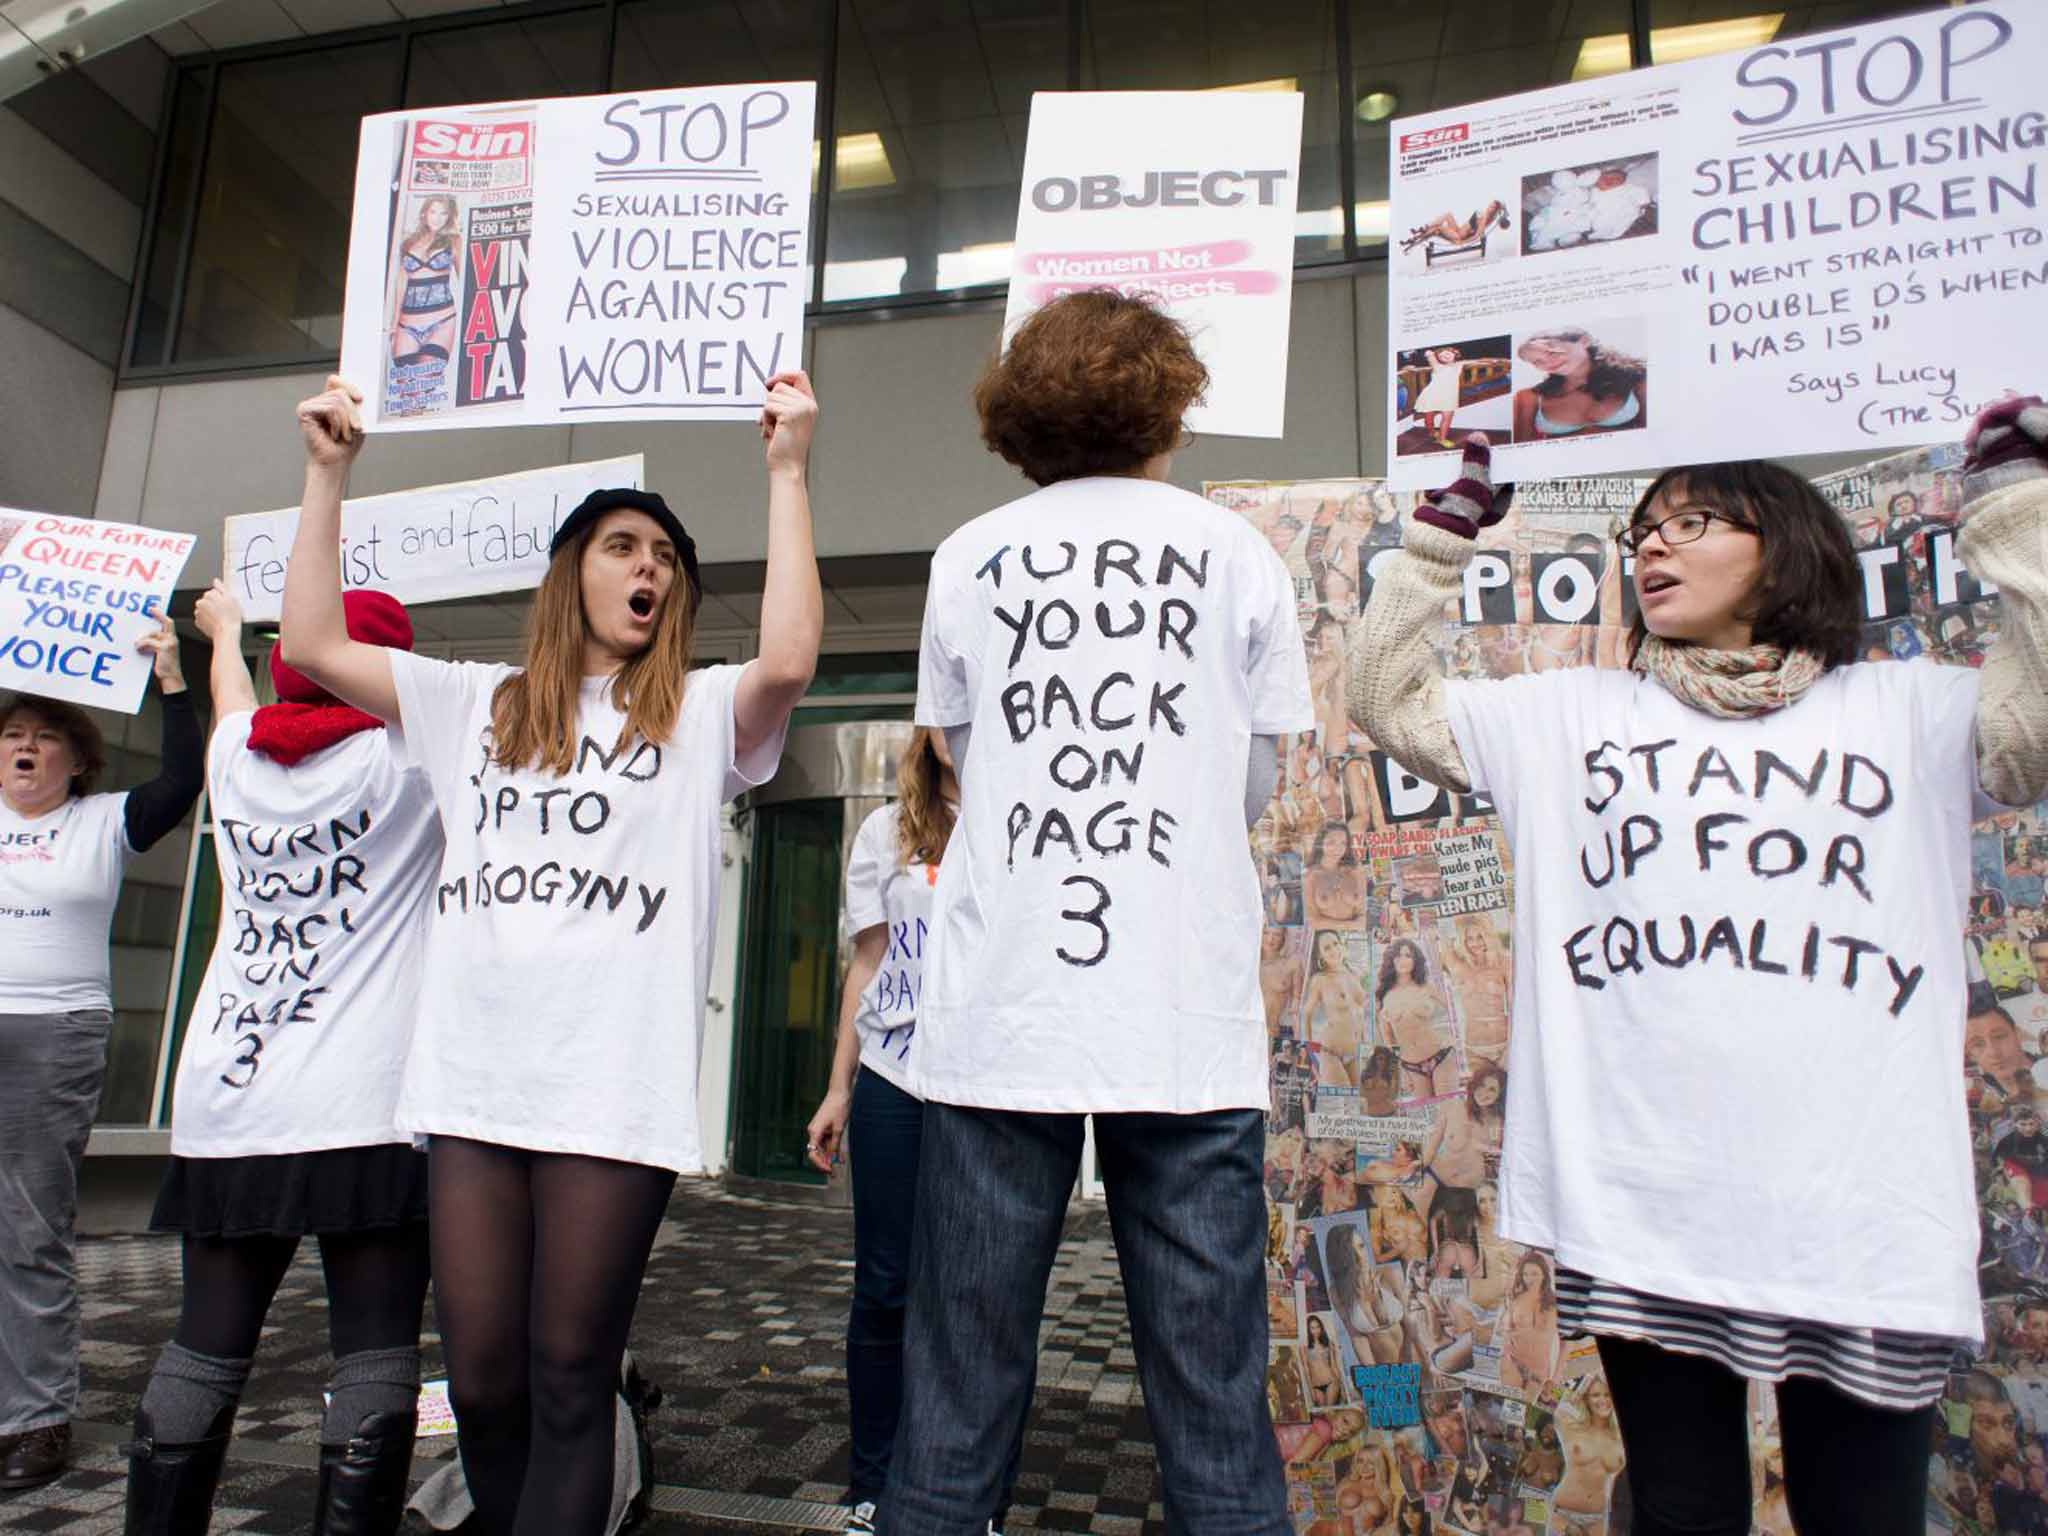 Protests outside 'The Sun' from No
More Page 3 campaigners